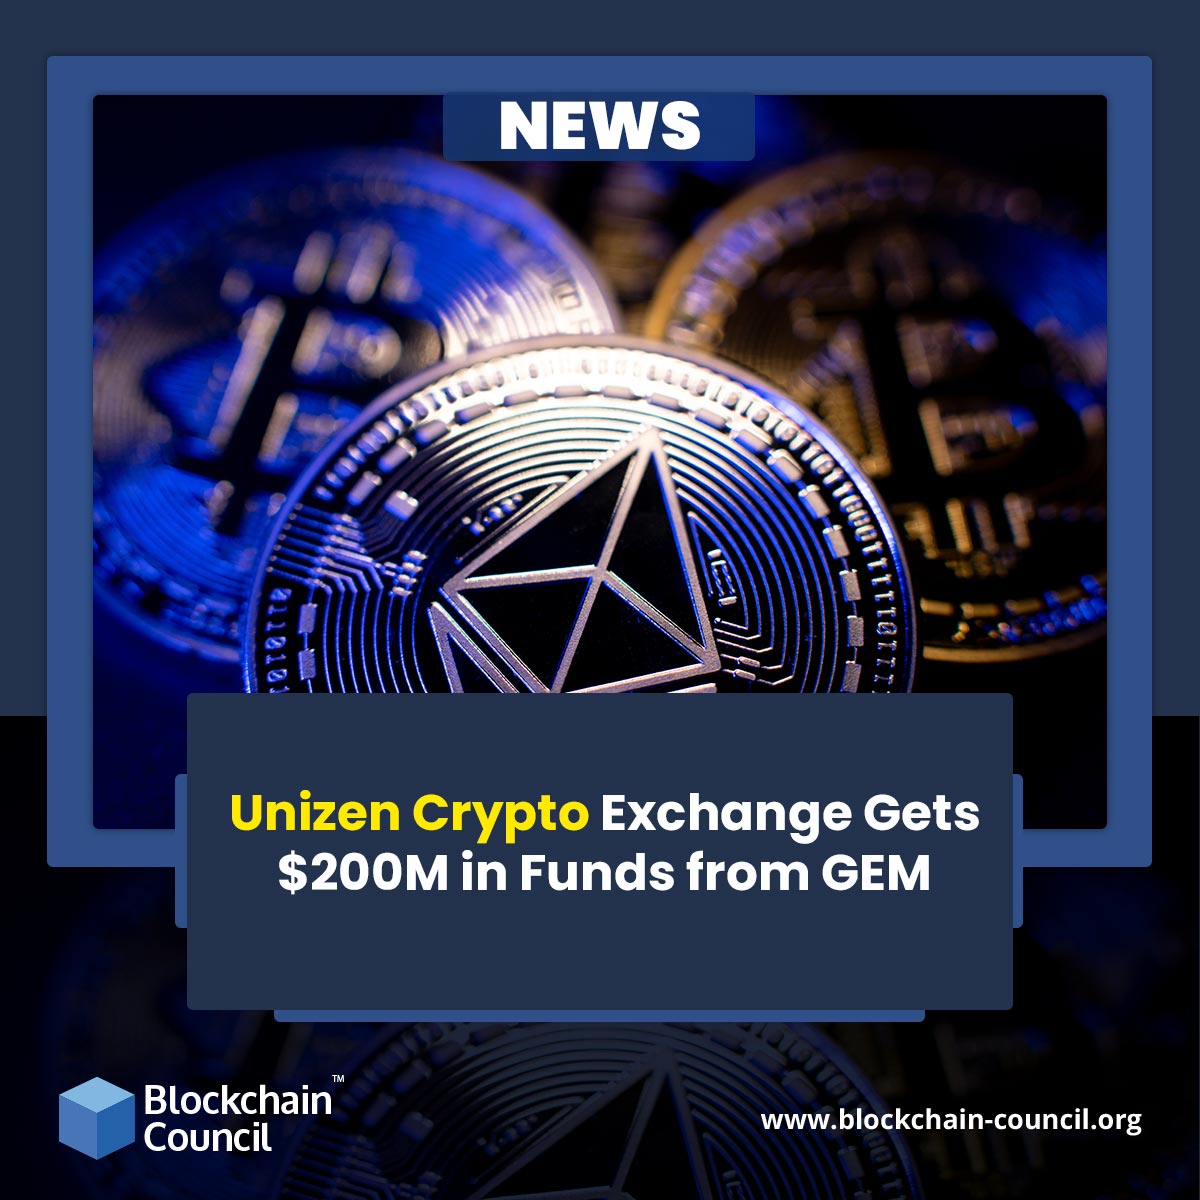 Unizen Crypto Exchange Gets $200M in Funds from GEM